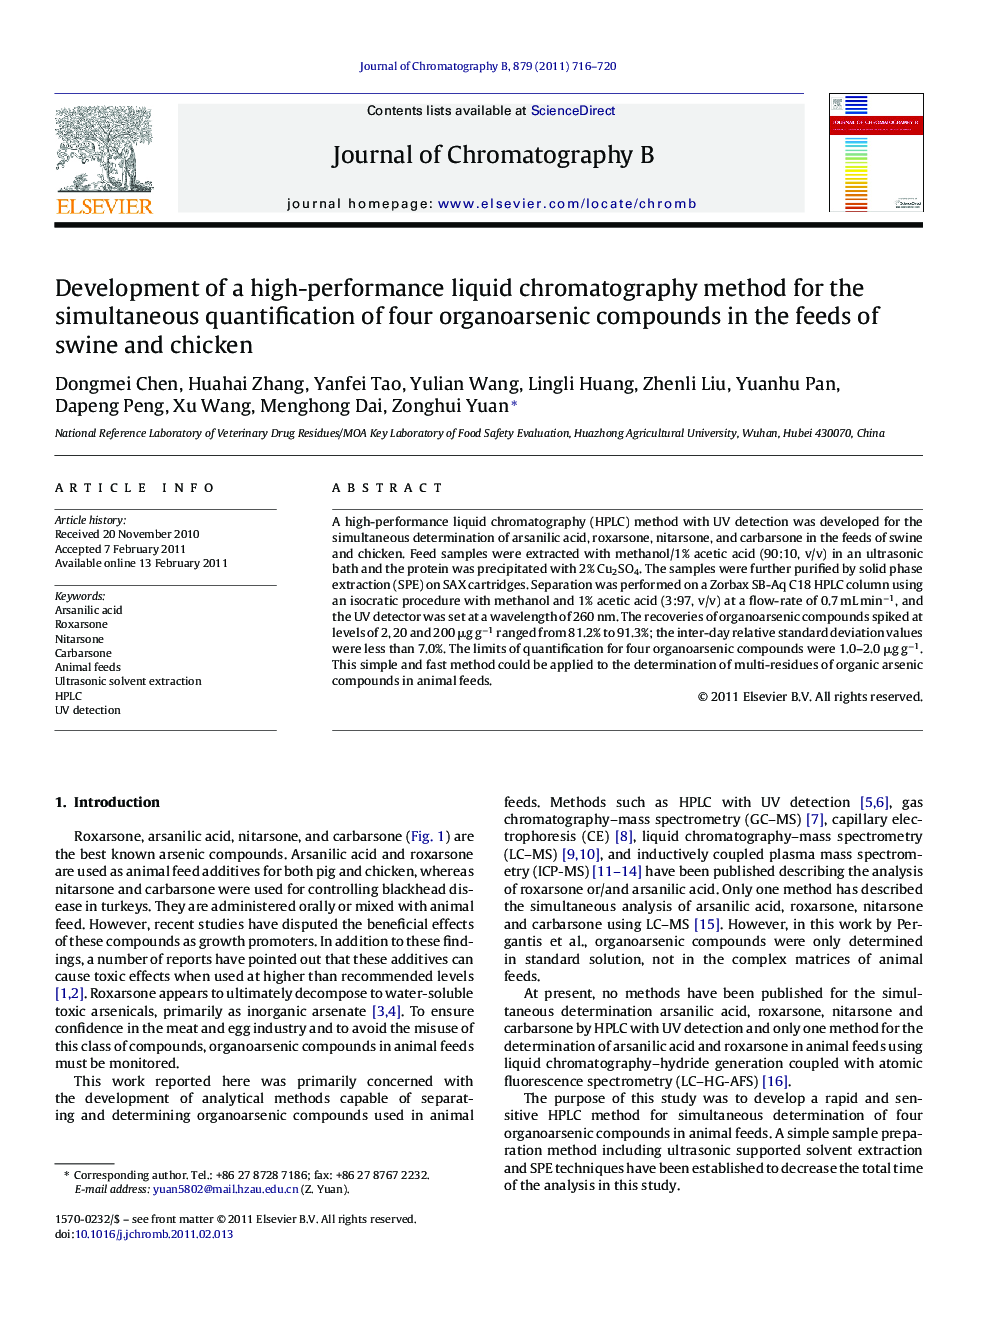 Development of a high-performance liquid chromatography method for the simultaneous quantification of four organoarsenic compounds in the feeds of swine and chicken